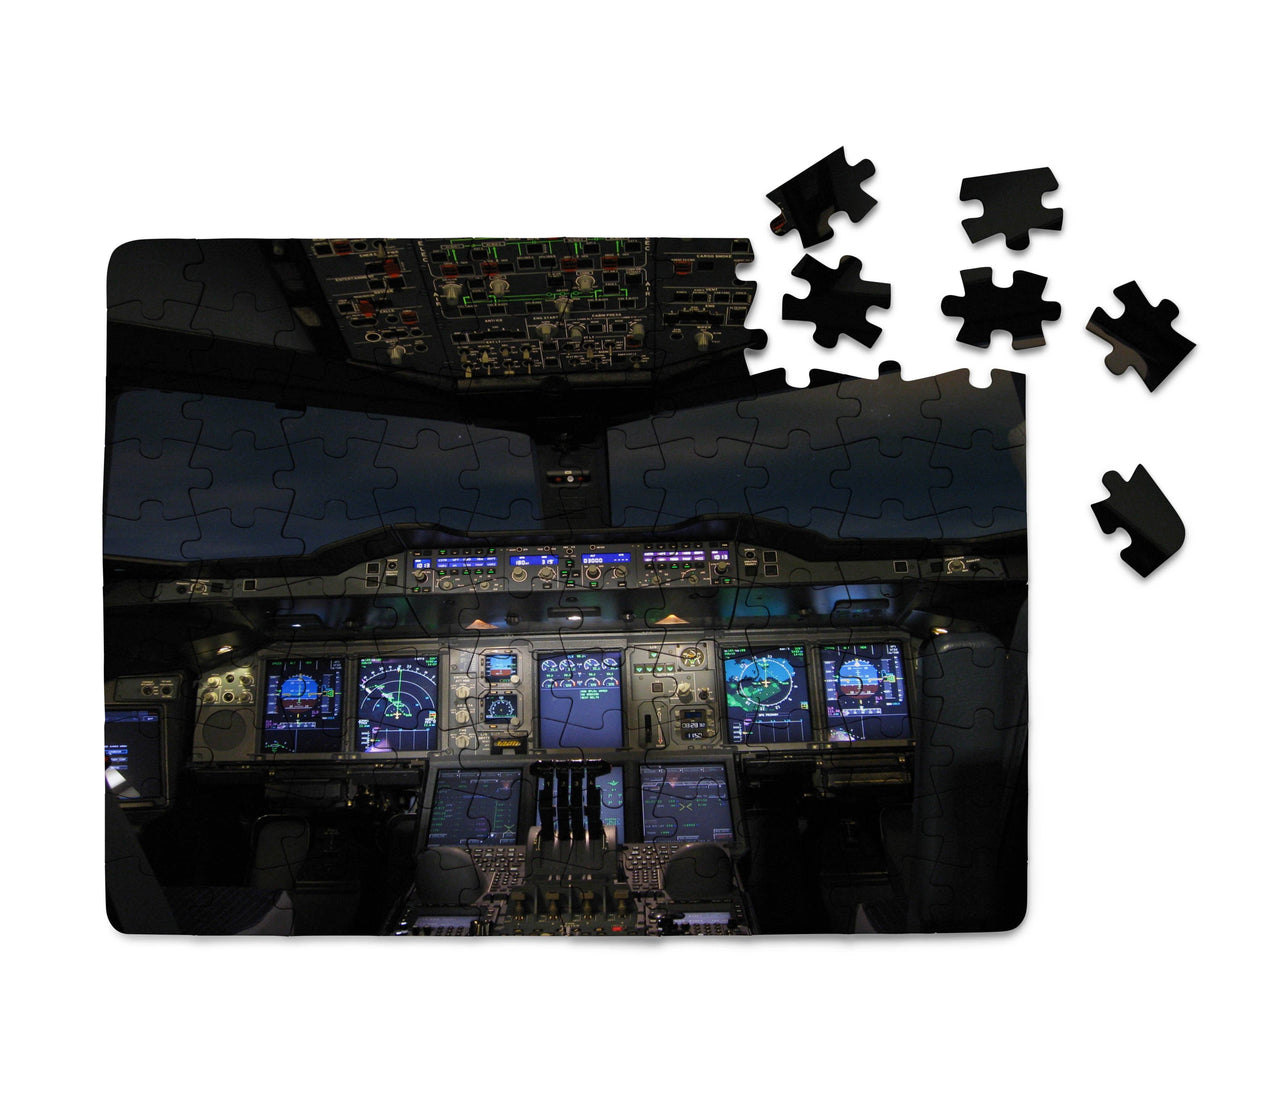 Airbus A380 Cockpit Printed Puzzles Aviation Shop 